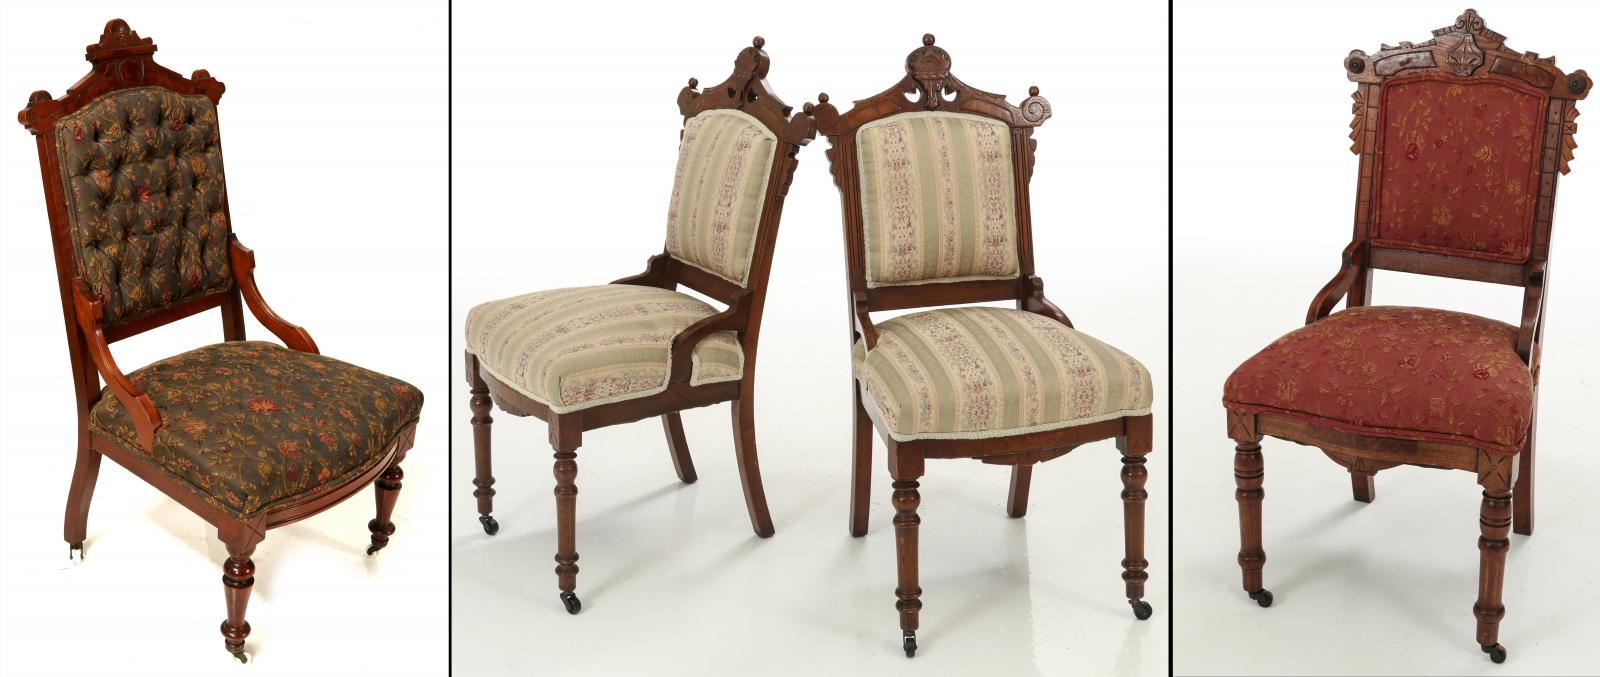 FOUR NICE AMERICAN VICTORIAN WALNUT PARLOR CHAIRS